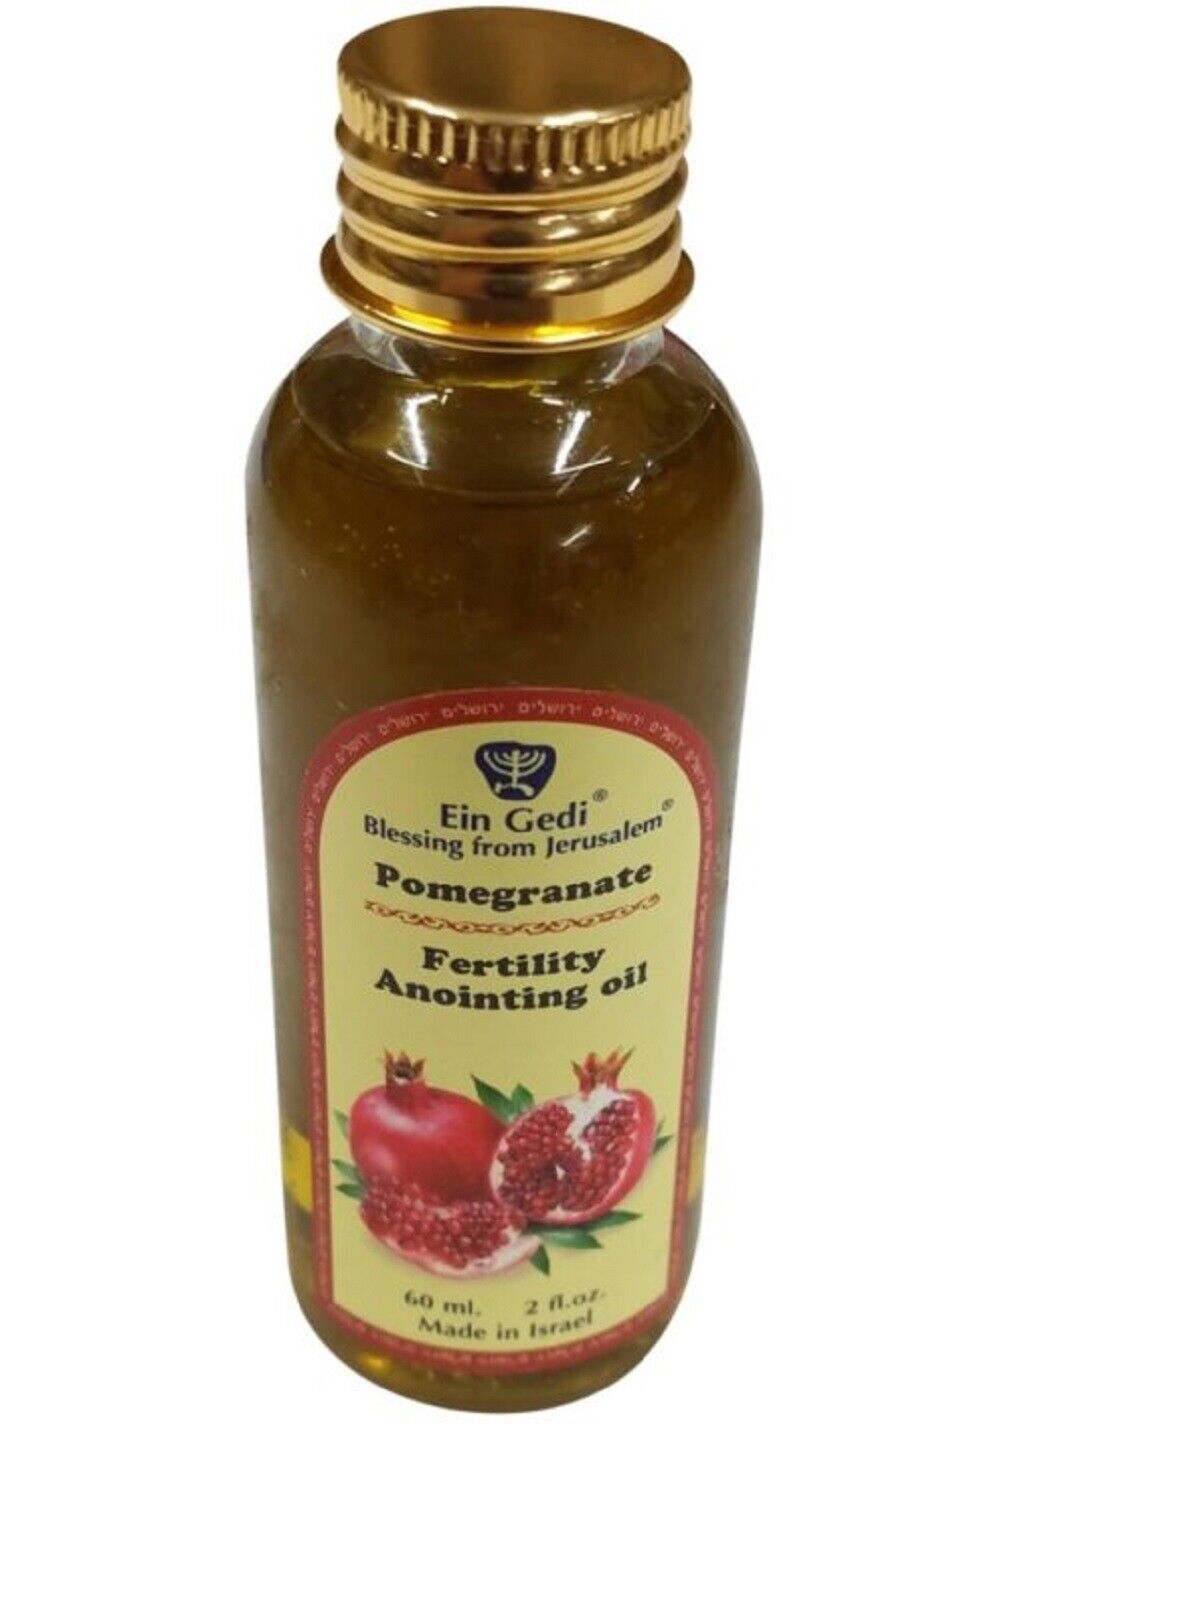 Blessed Pomegranate Fertility Anointing Oil 60ml Certificated Bottle Authentic